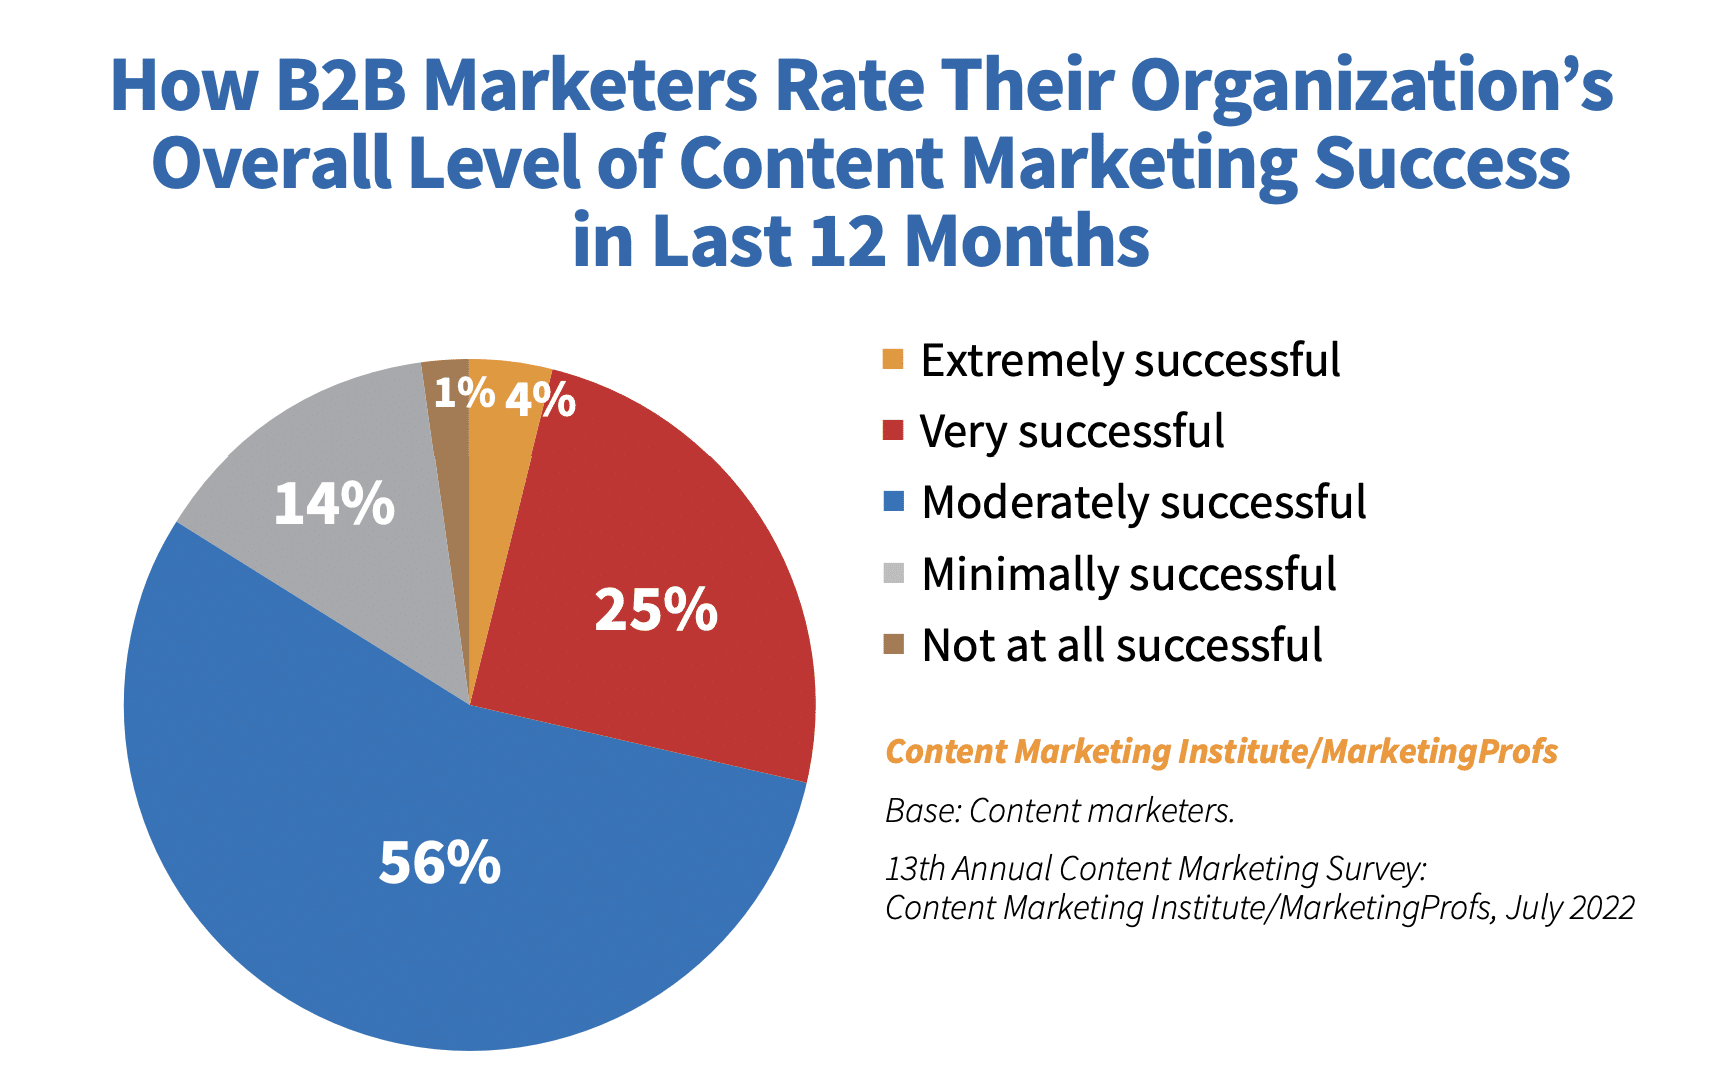 graph shows that only 5% of organizations say they are extremely or very successful with content marketing